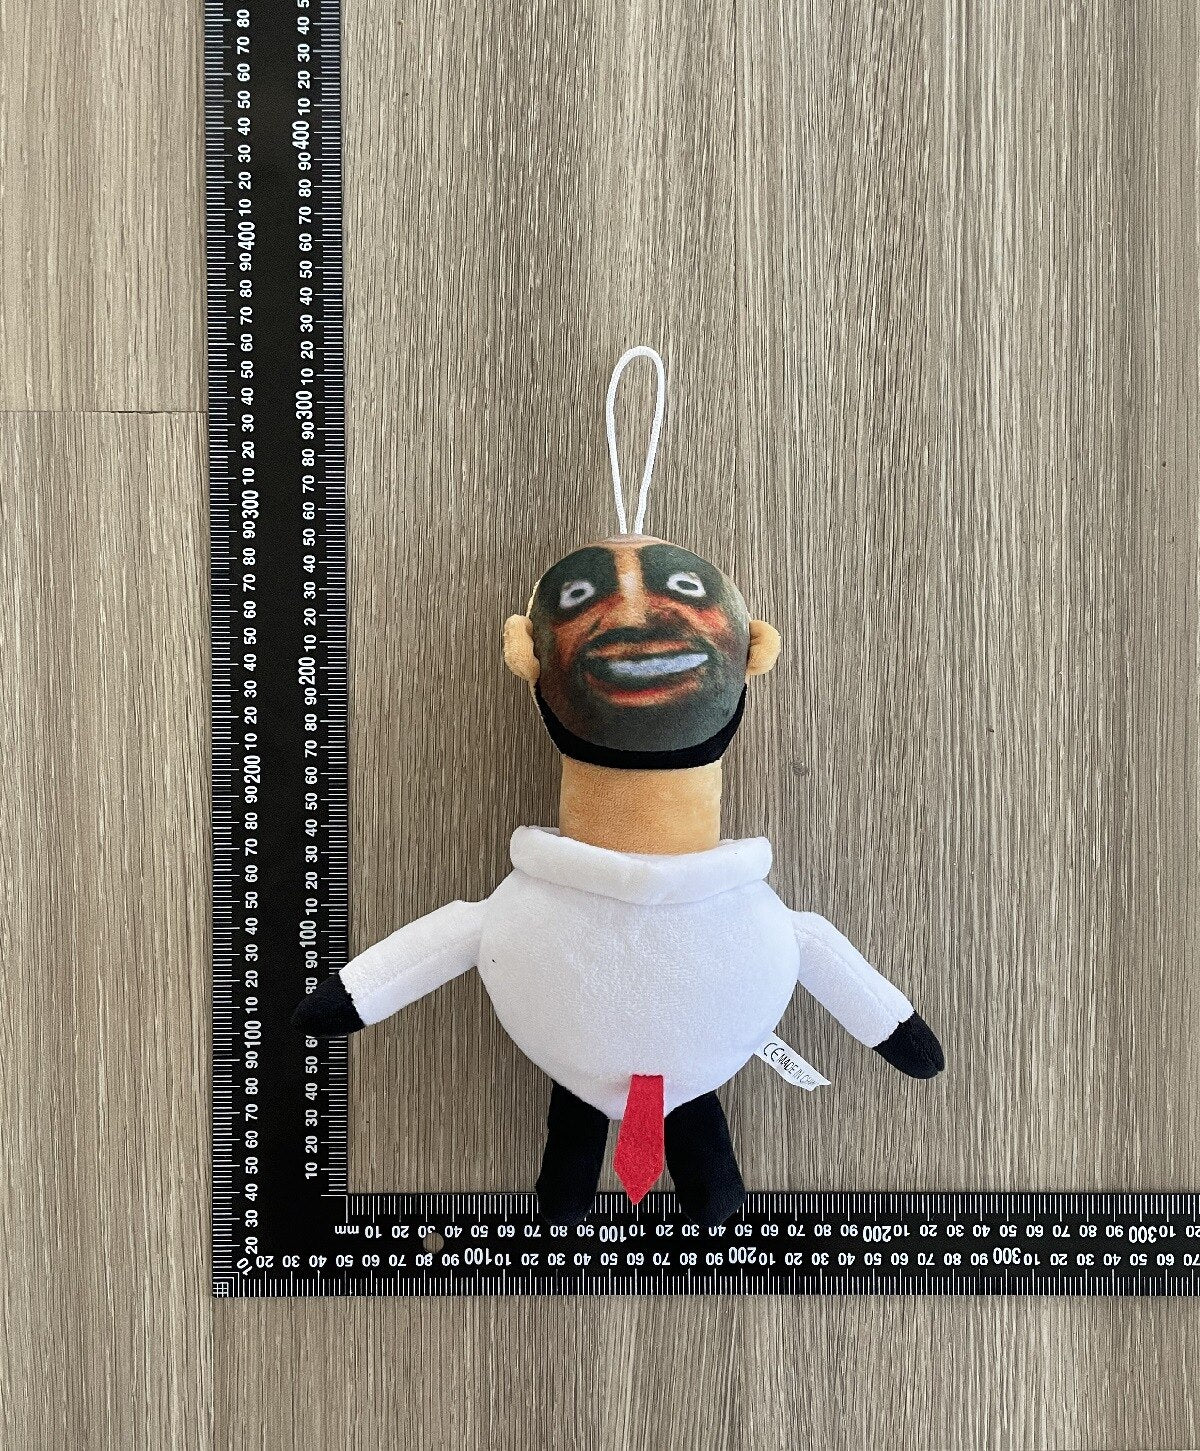 Skibidi Toilet Plush: The Perfect Gift for Fans of the Skibidi Song